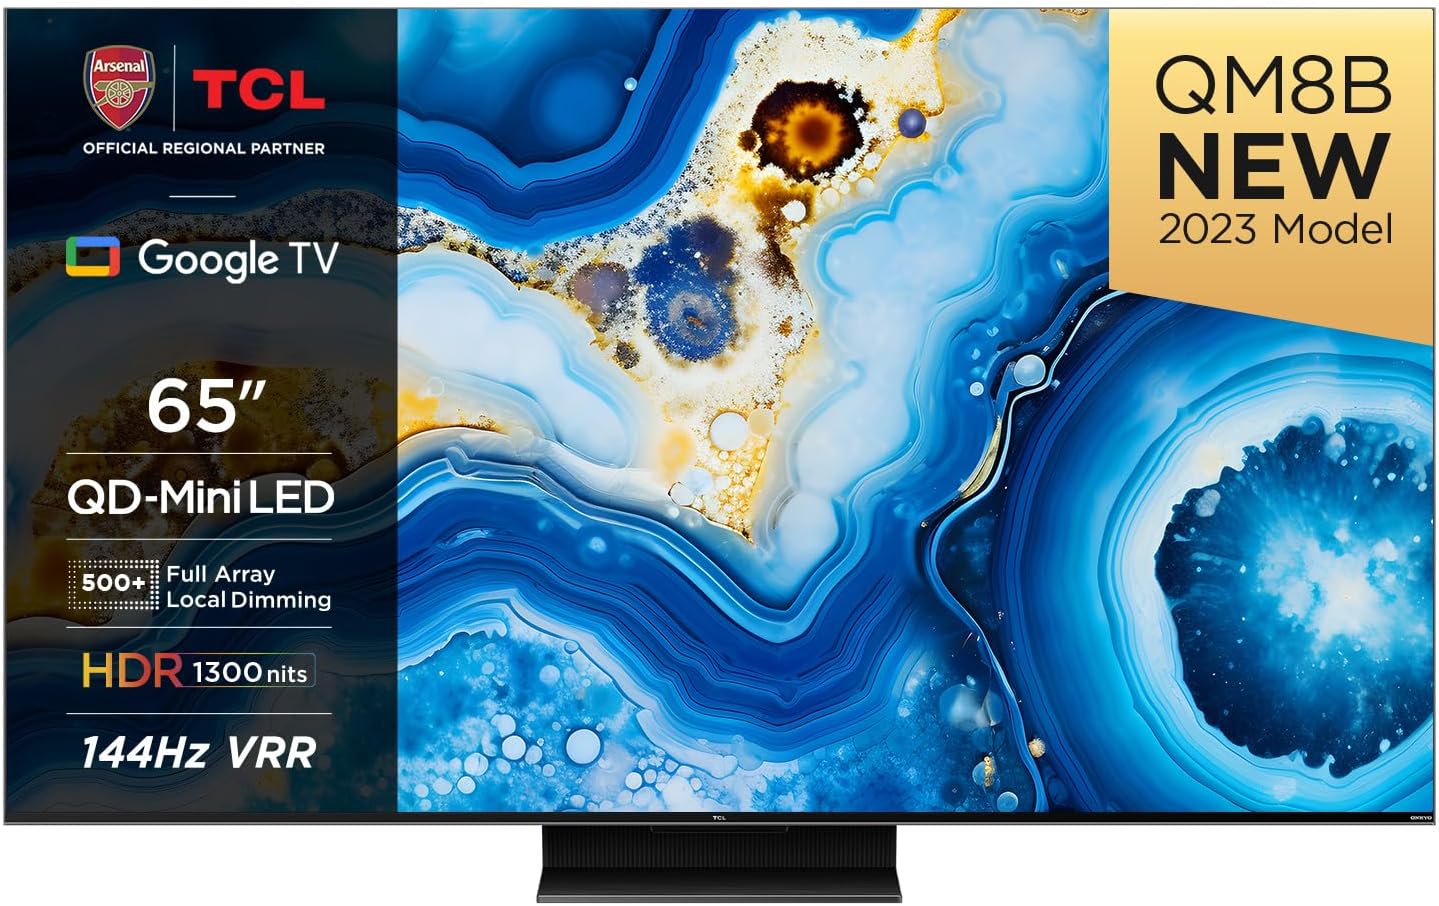 TCL 50QM8B 50 - inch QLED Mini LED Smart TV, 4K HDR Premium 1300nits, Powered by Google TV (Dolby Vision & Atmos, Onkyo 2.0 sound system, 144Hz Motion Clarity Pro, Hands - Free Voice Control) - Amazing Gadgets Outlet